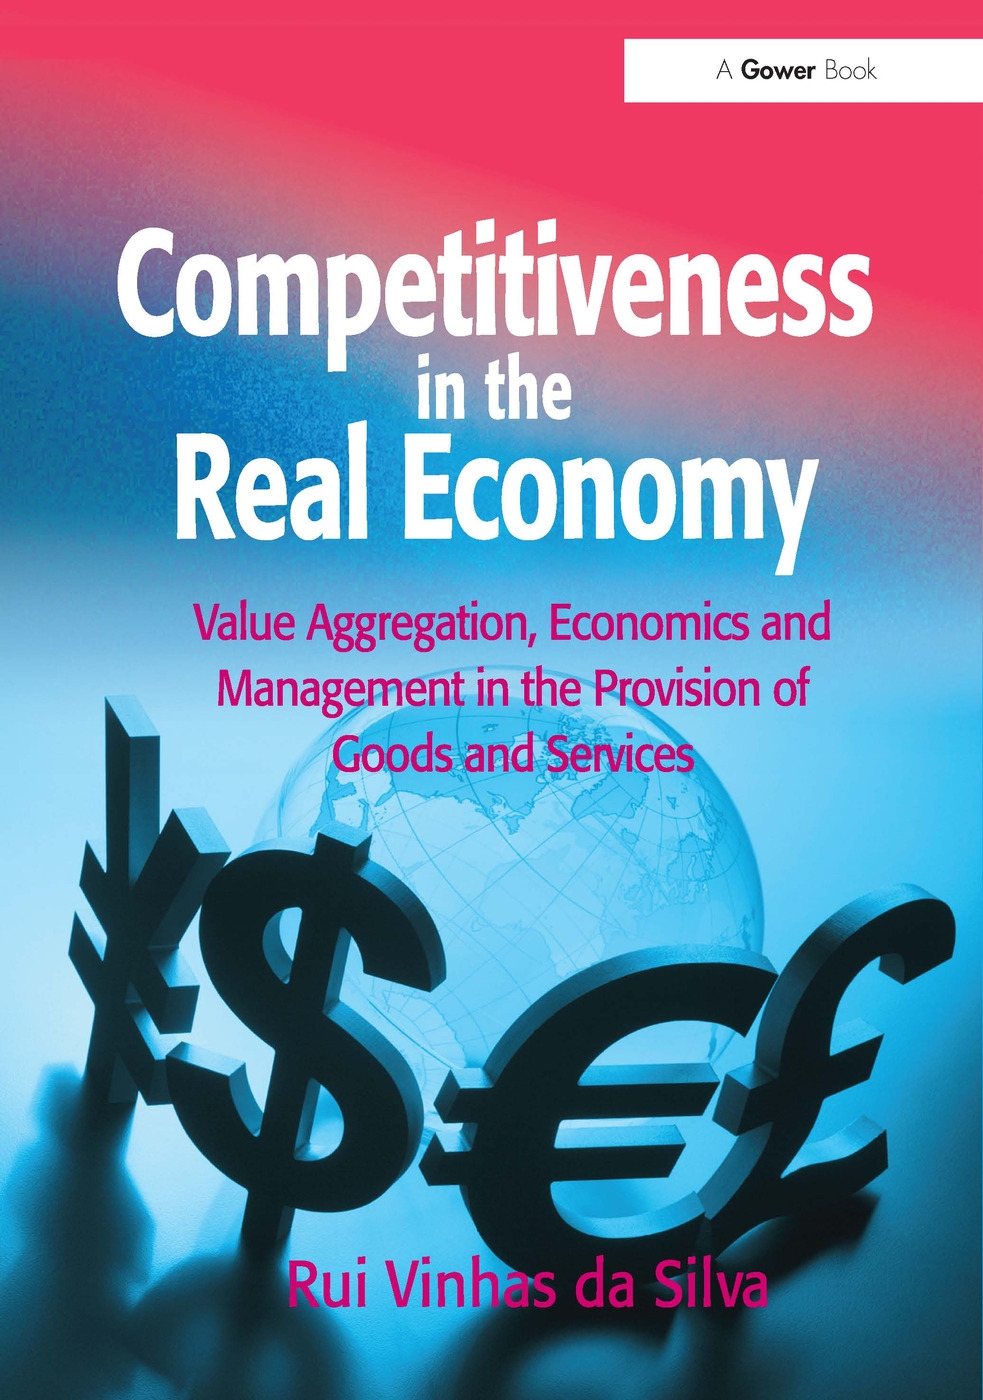 Competitiveness in the Real Economy: Value Aggregation, Economics and Management in the Provision of Goods and Services. Rui Vinhas Da Silva